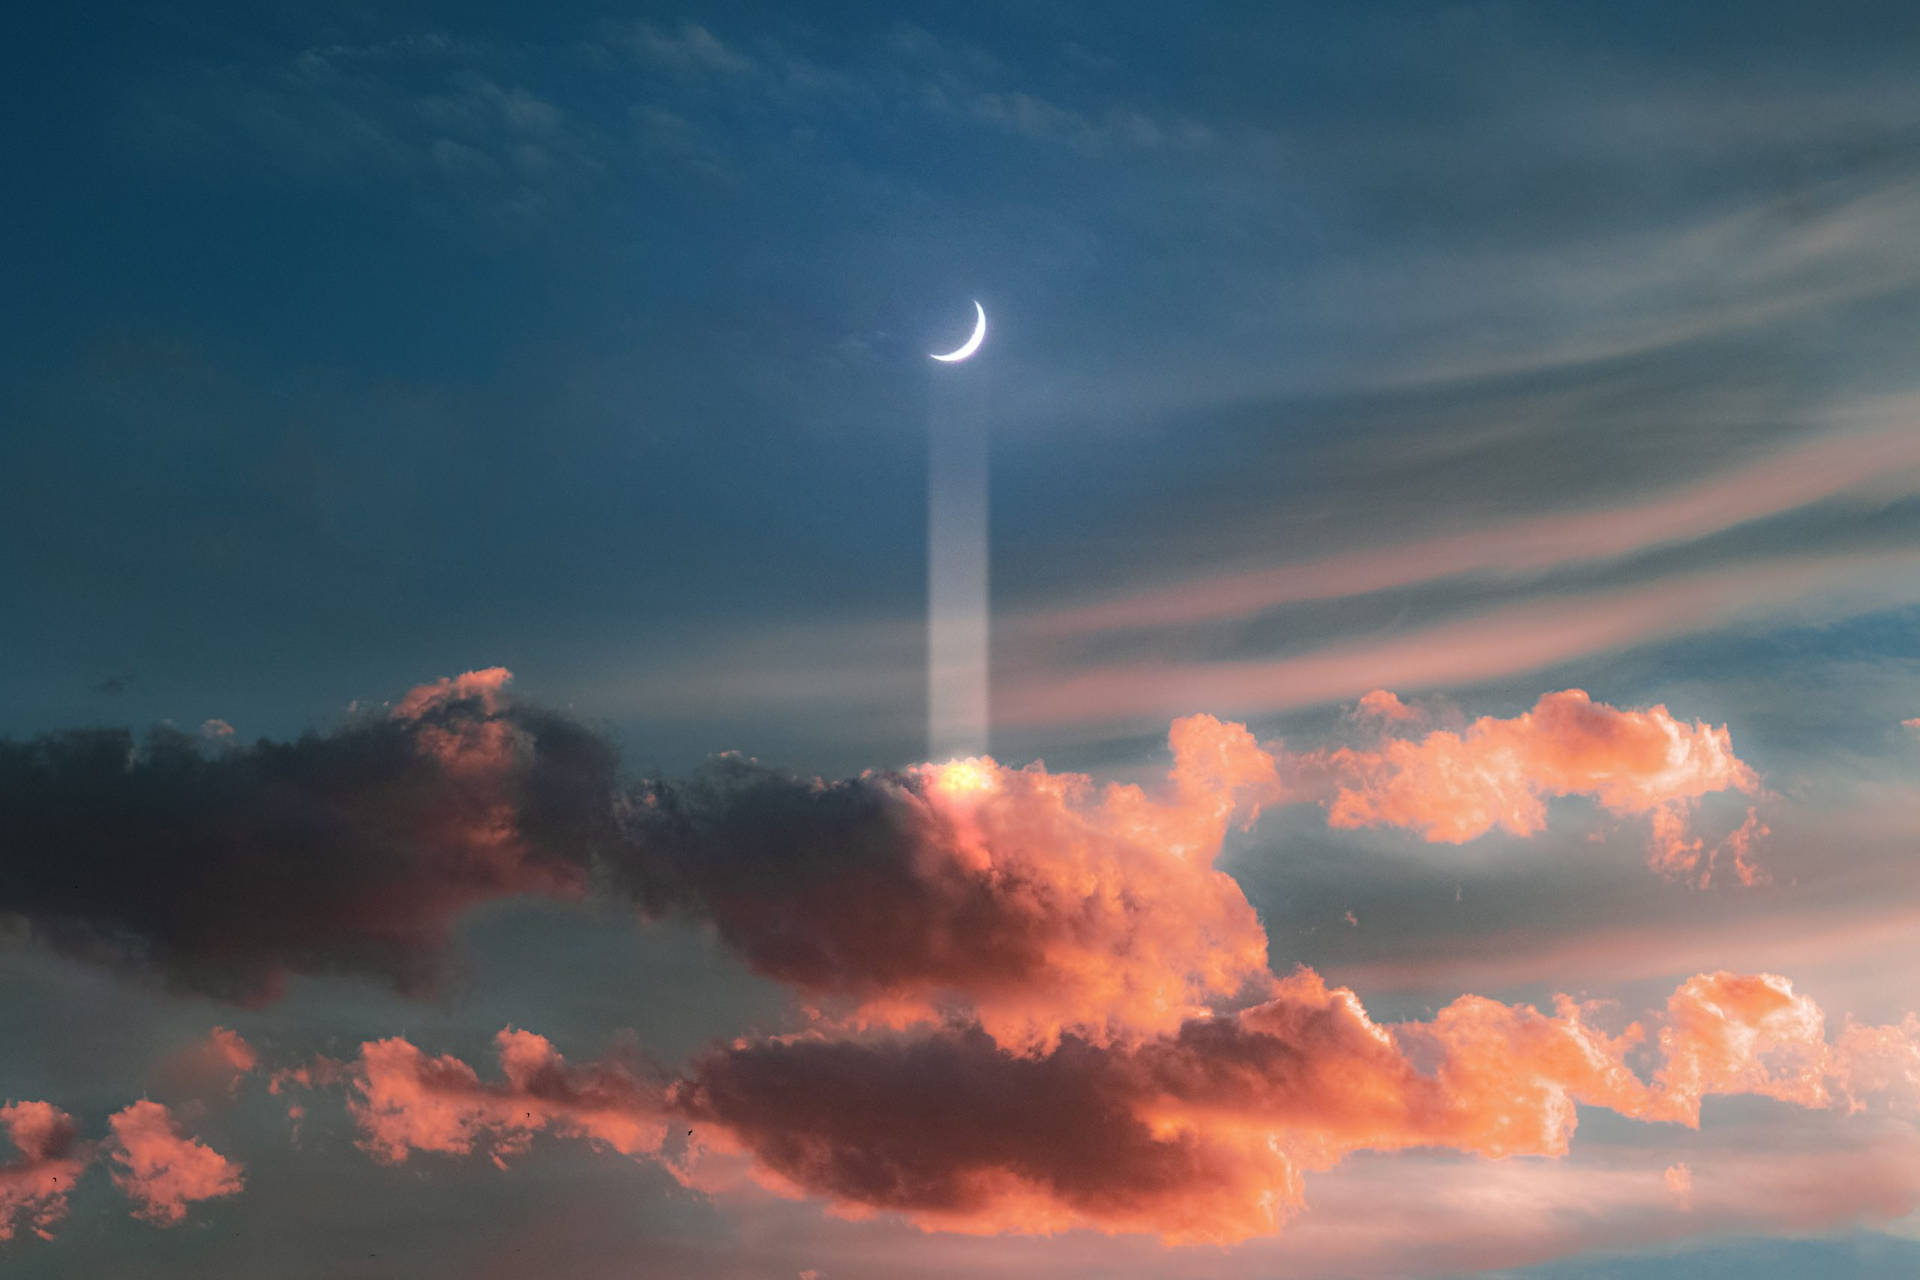 Sunset Sky With Crescent Moon